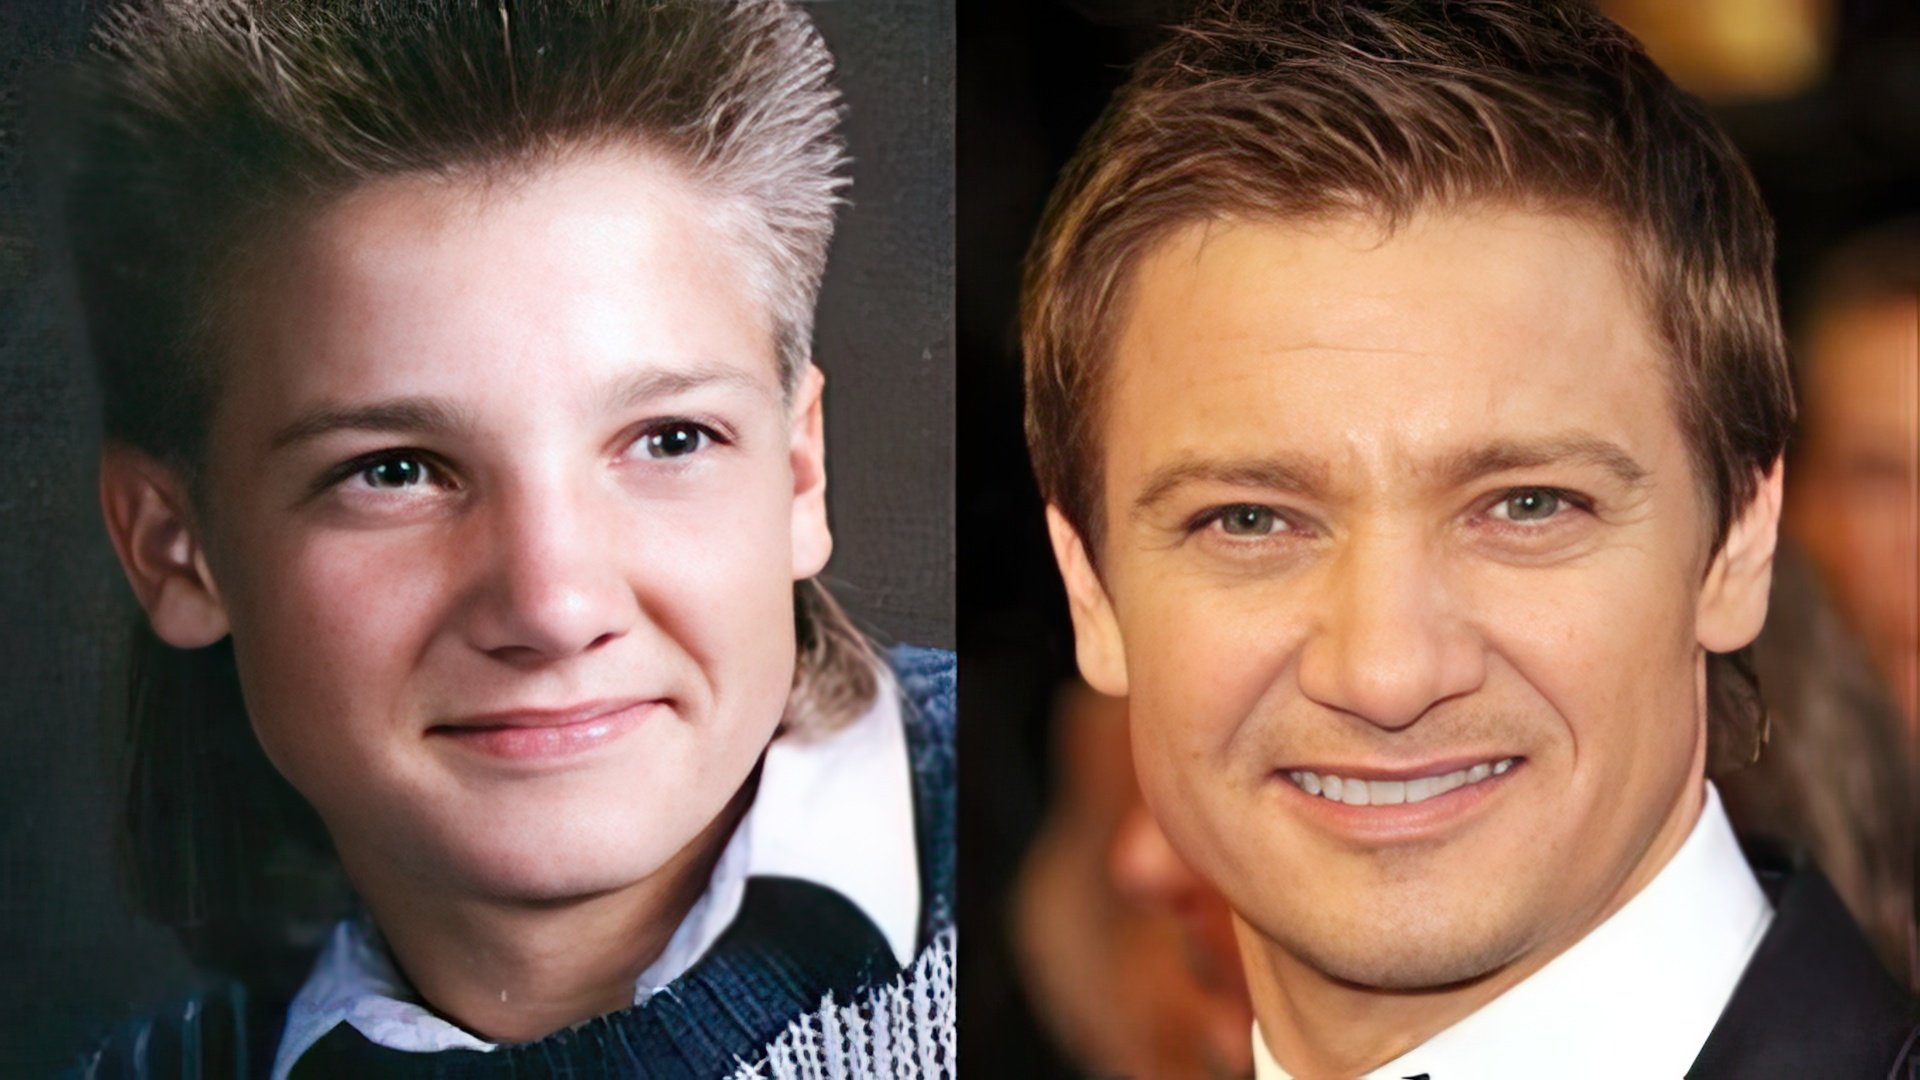 Jeremy Renner as a child and now